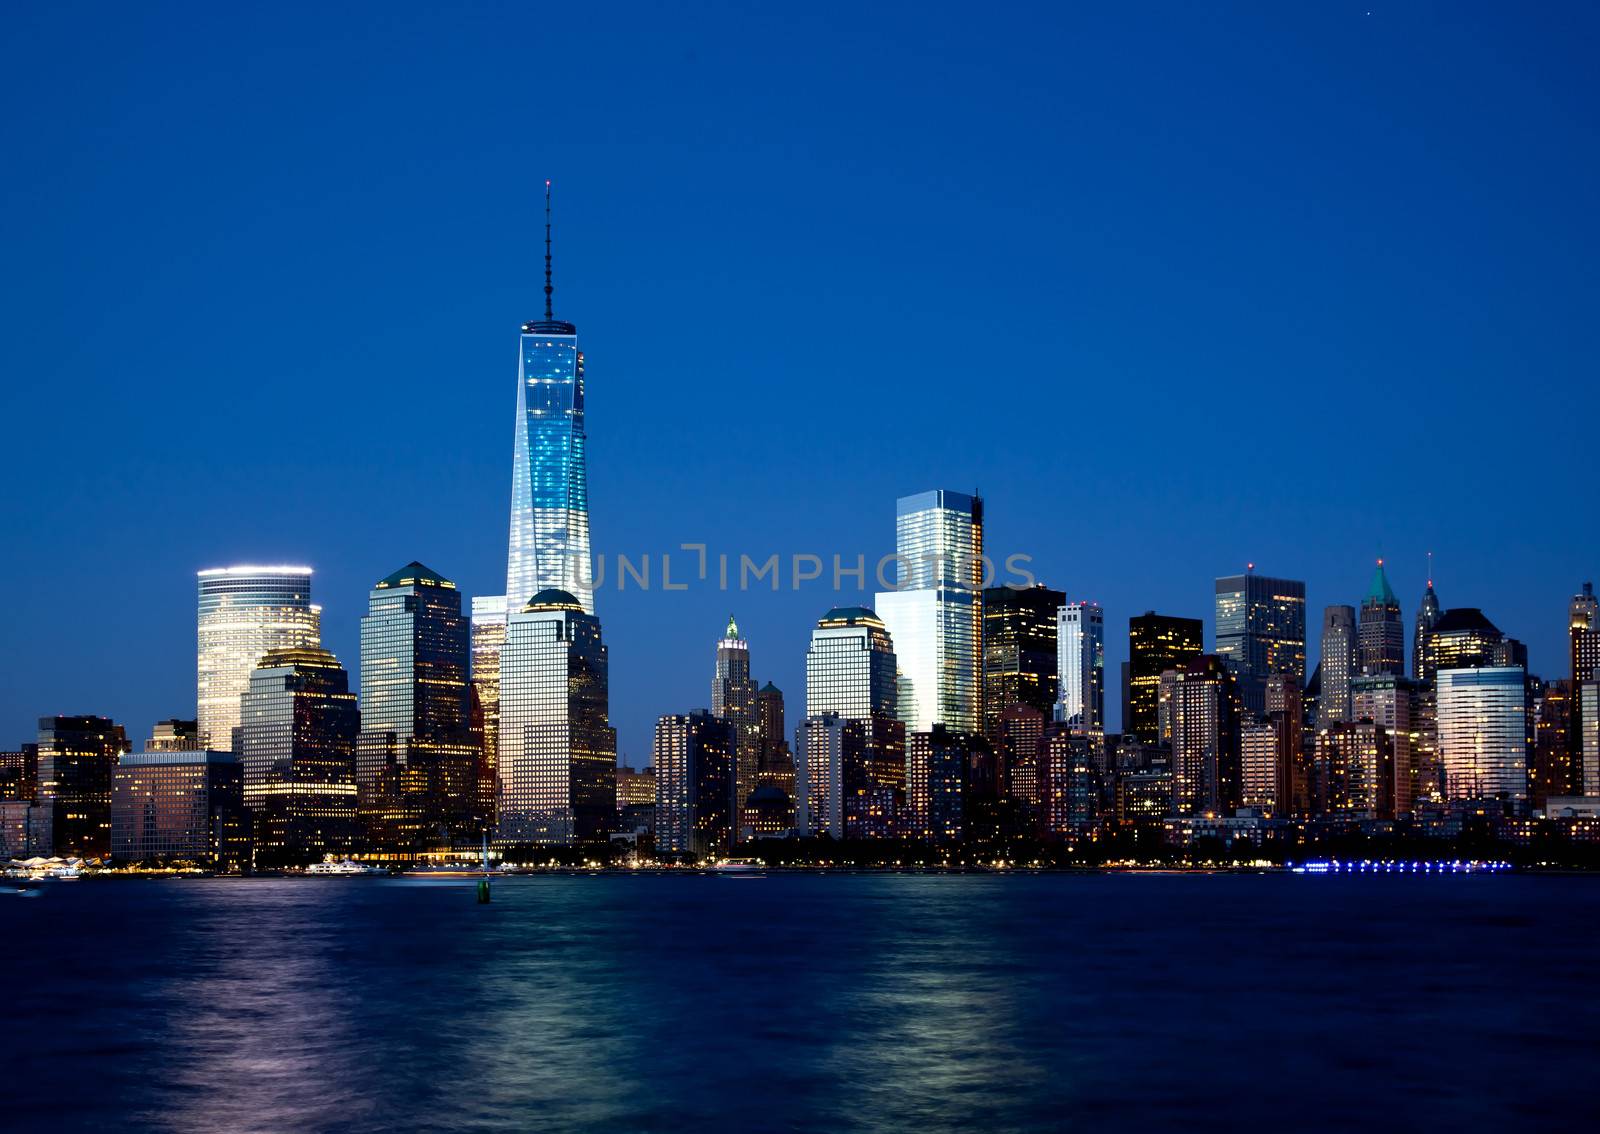 The new Freedom Tower and Lower Manhattan Skyline At Night by gary718